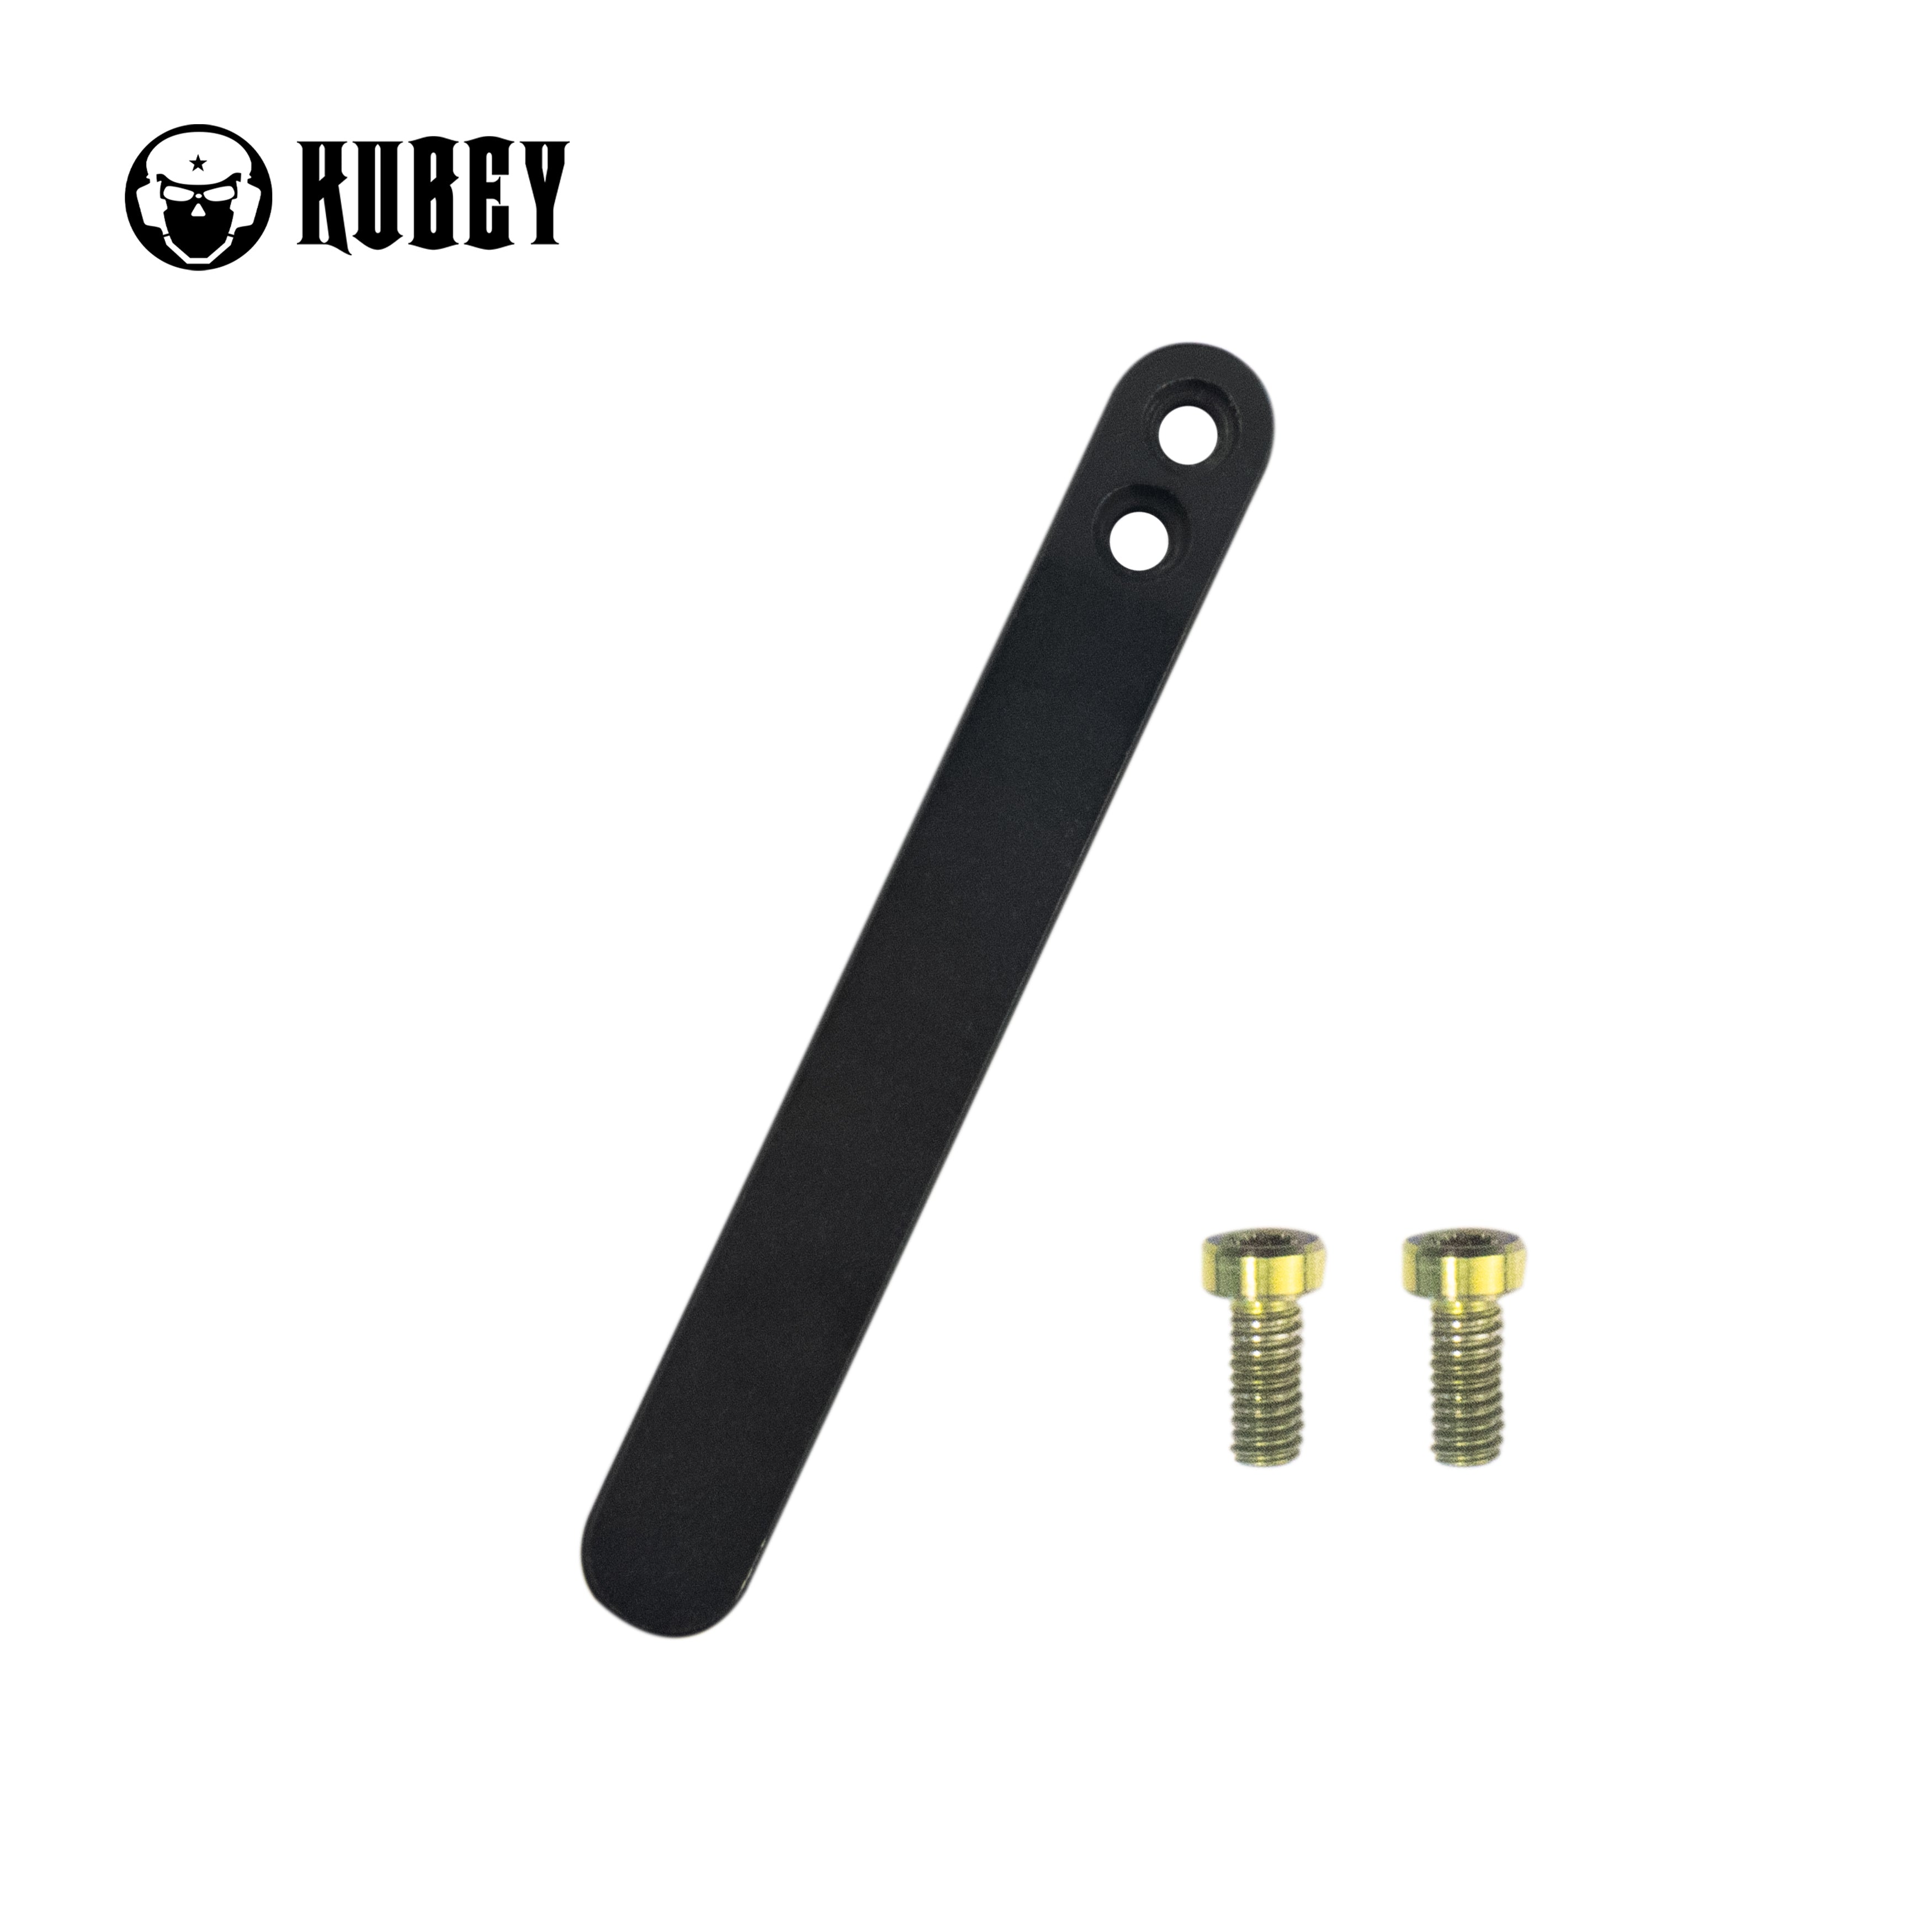 Kubey Titanium Clip for Folding Knives, 1 Piece with 2 Screws, Black, KH033